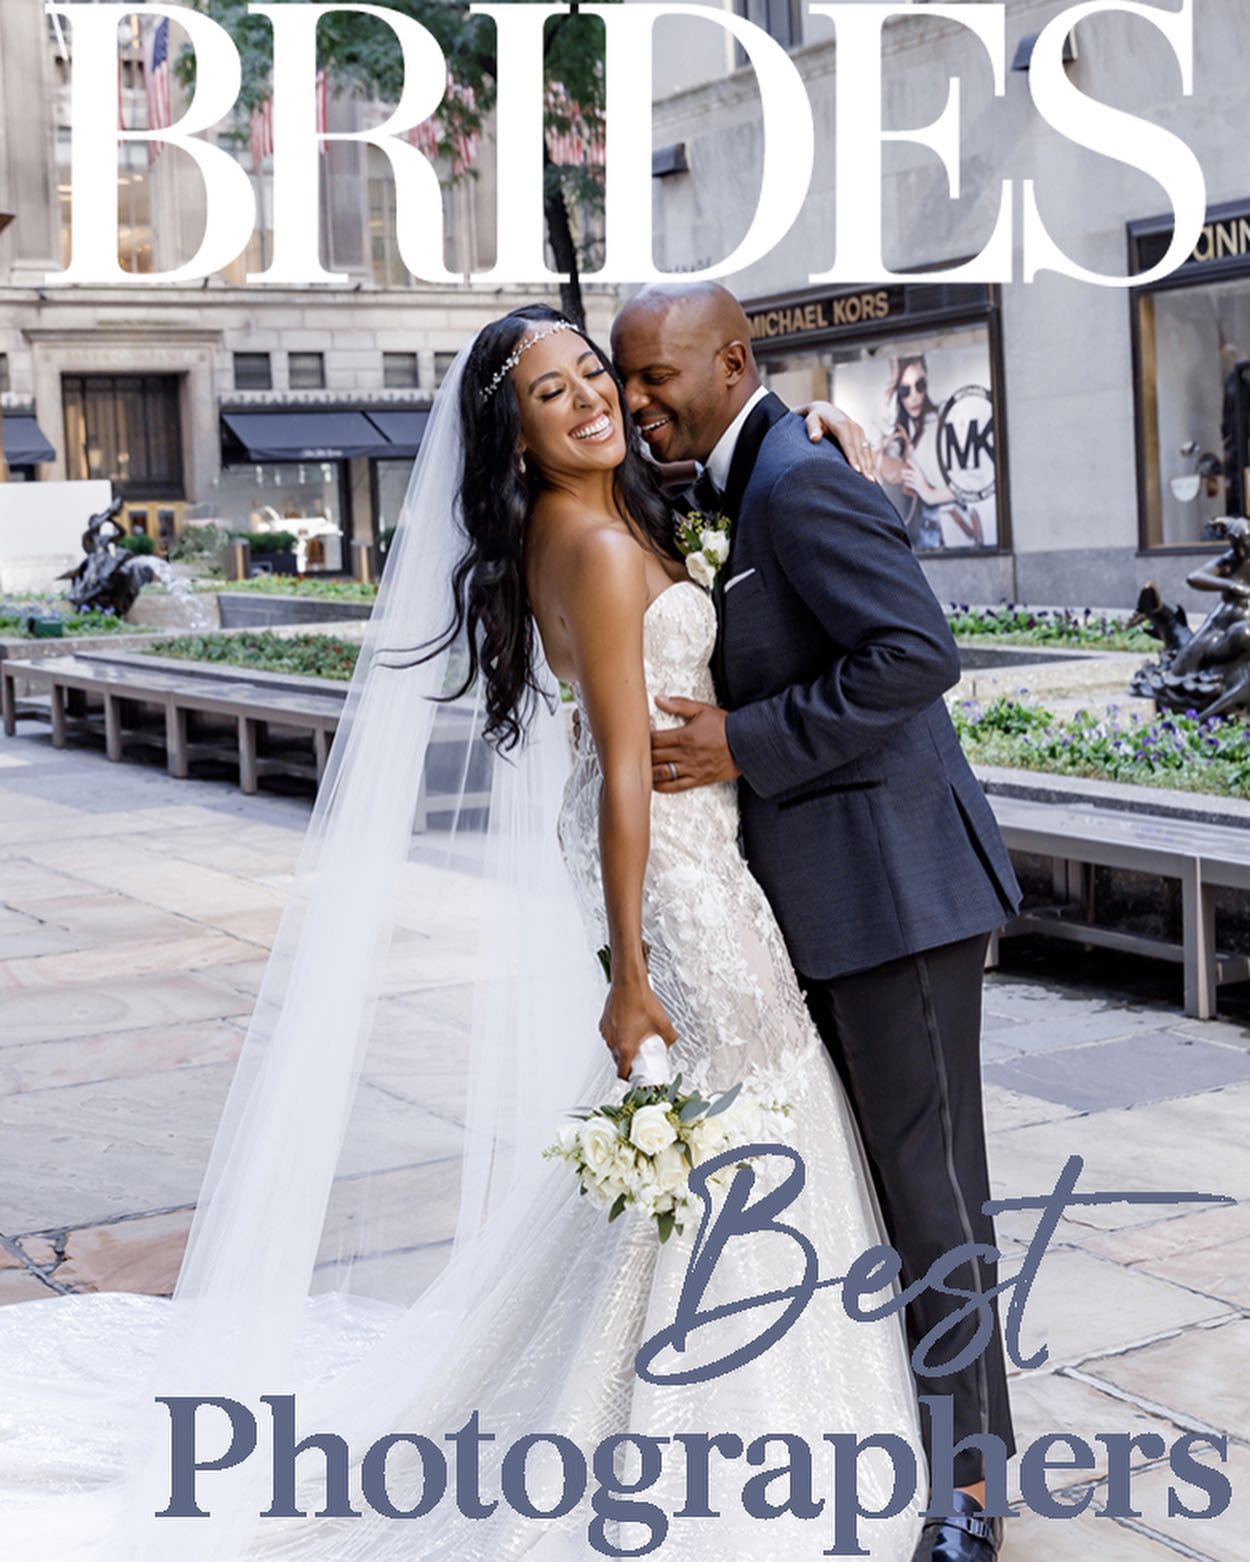 An amazing way to be closing out 2020 ? Thanks so much @brides for including on your Best Photographers list. Truly an honor ?



Shout out to all my amazing friendors also included: @elizabethaustinphoto @aneeatelier @joshua_dwain @stanlophotography @aliciarinkaphoto @rheawhitney @chi_chi.ari @erickelley @lindamcqueenphotography @porterhouselaweddings @photosbyreem @samanthaclarke